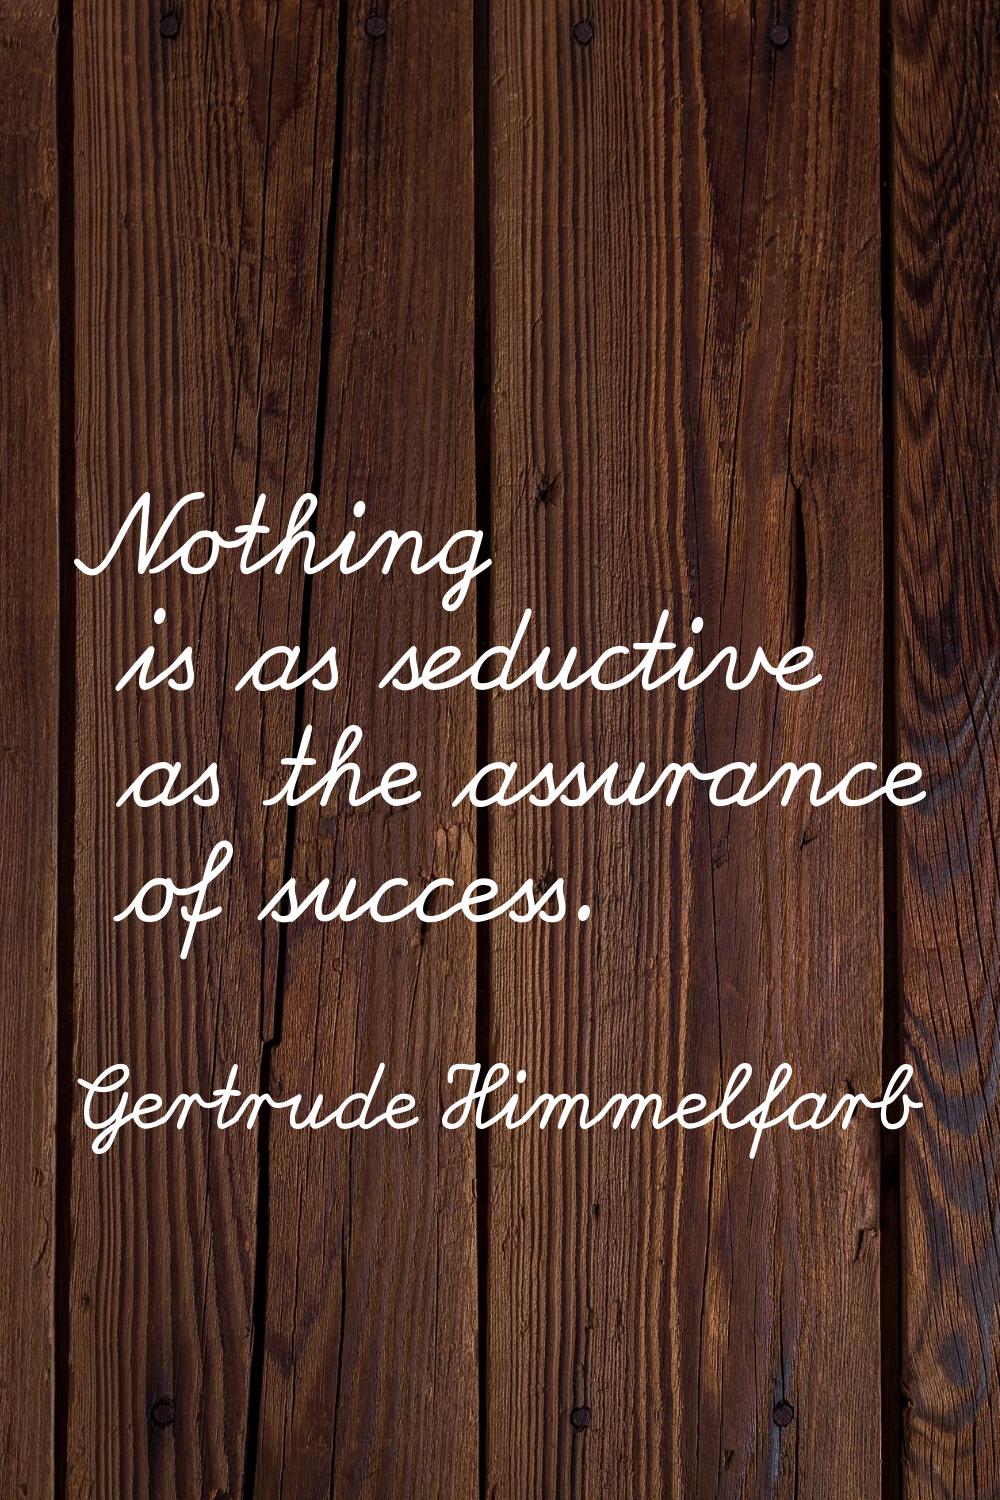 Nothing is as seductive as the assurance of success.